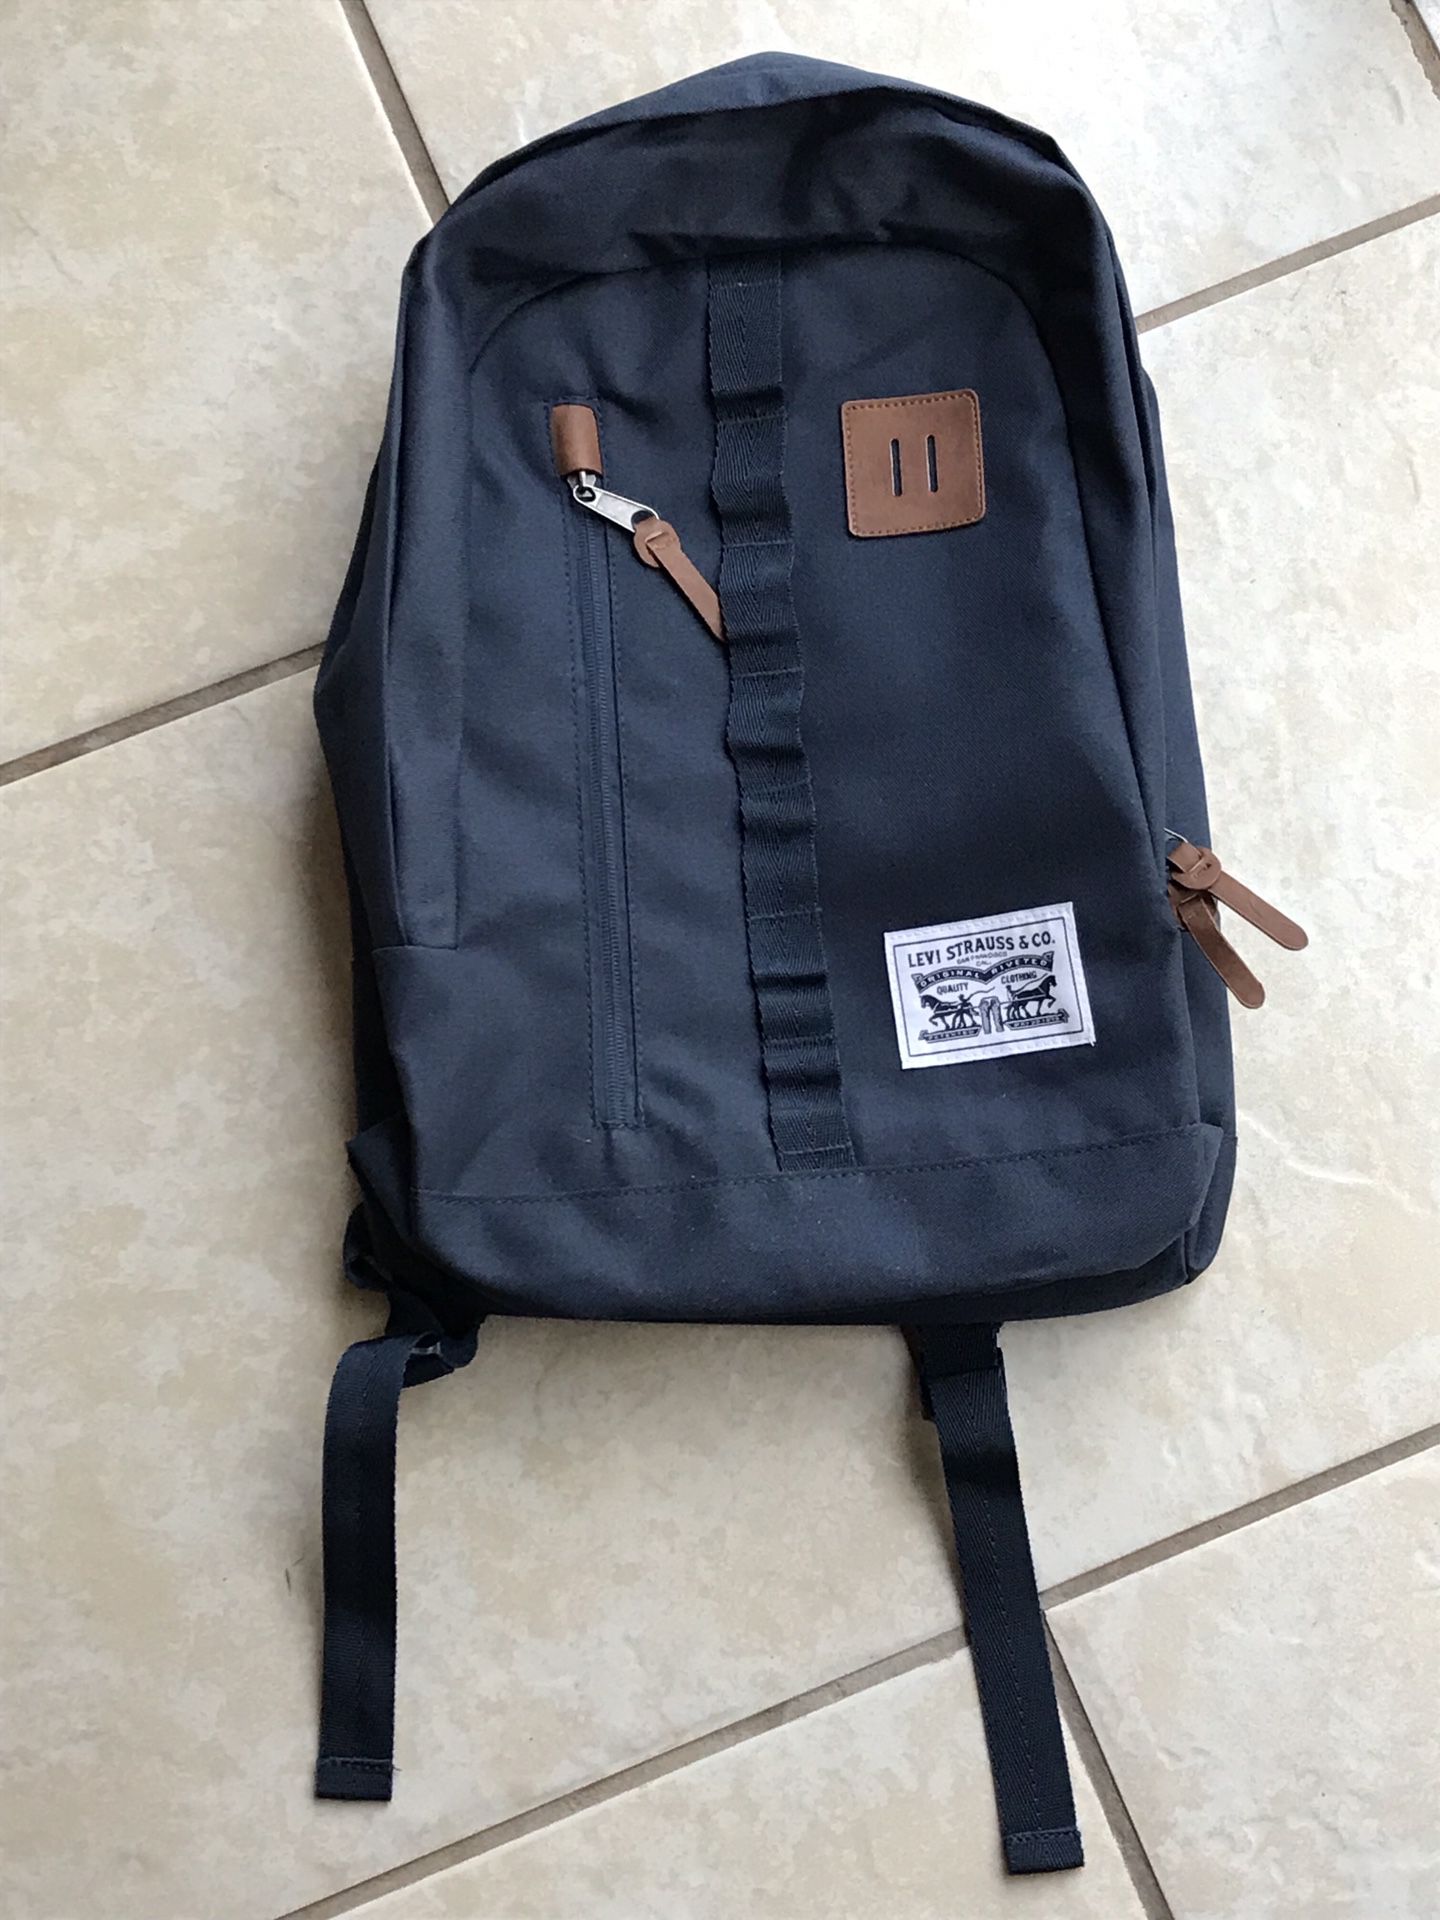 Levi's Backpack Canvas w /Laptop Padded Sleeve NEW